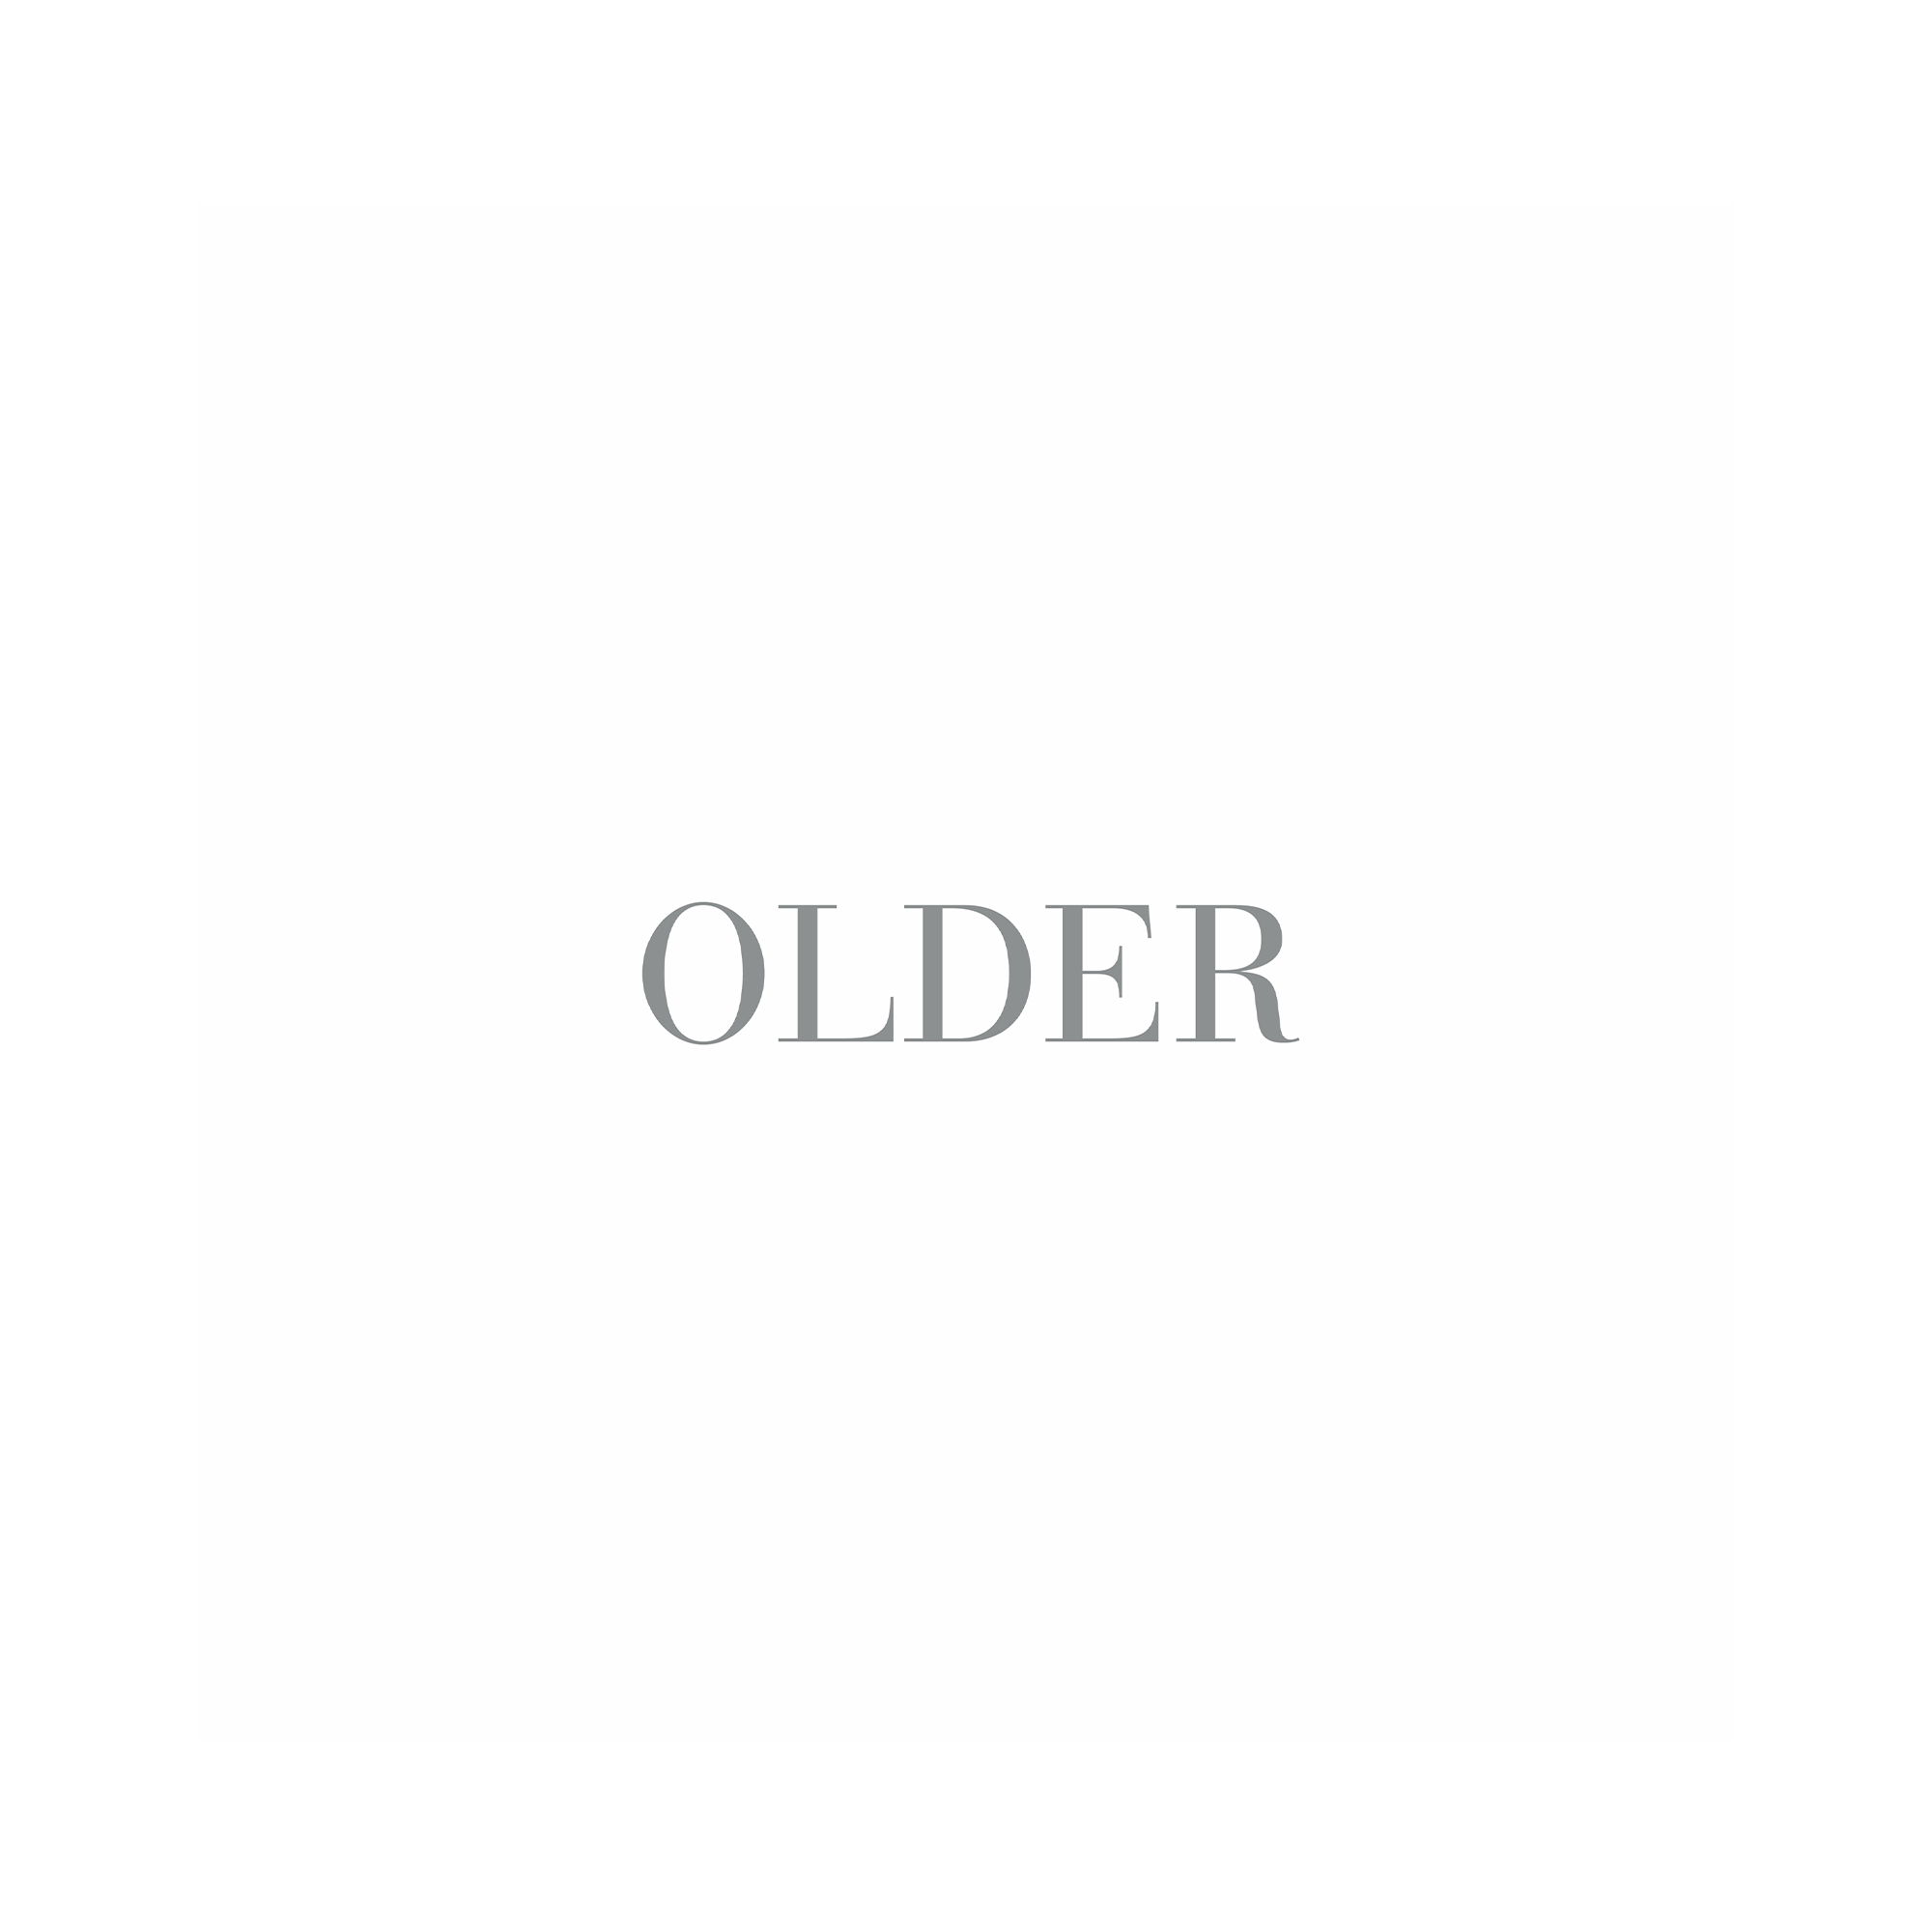 Older (Deluxe Edition Box Set)